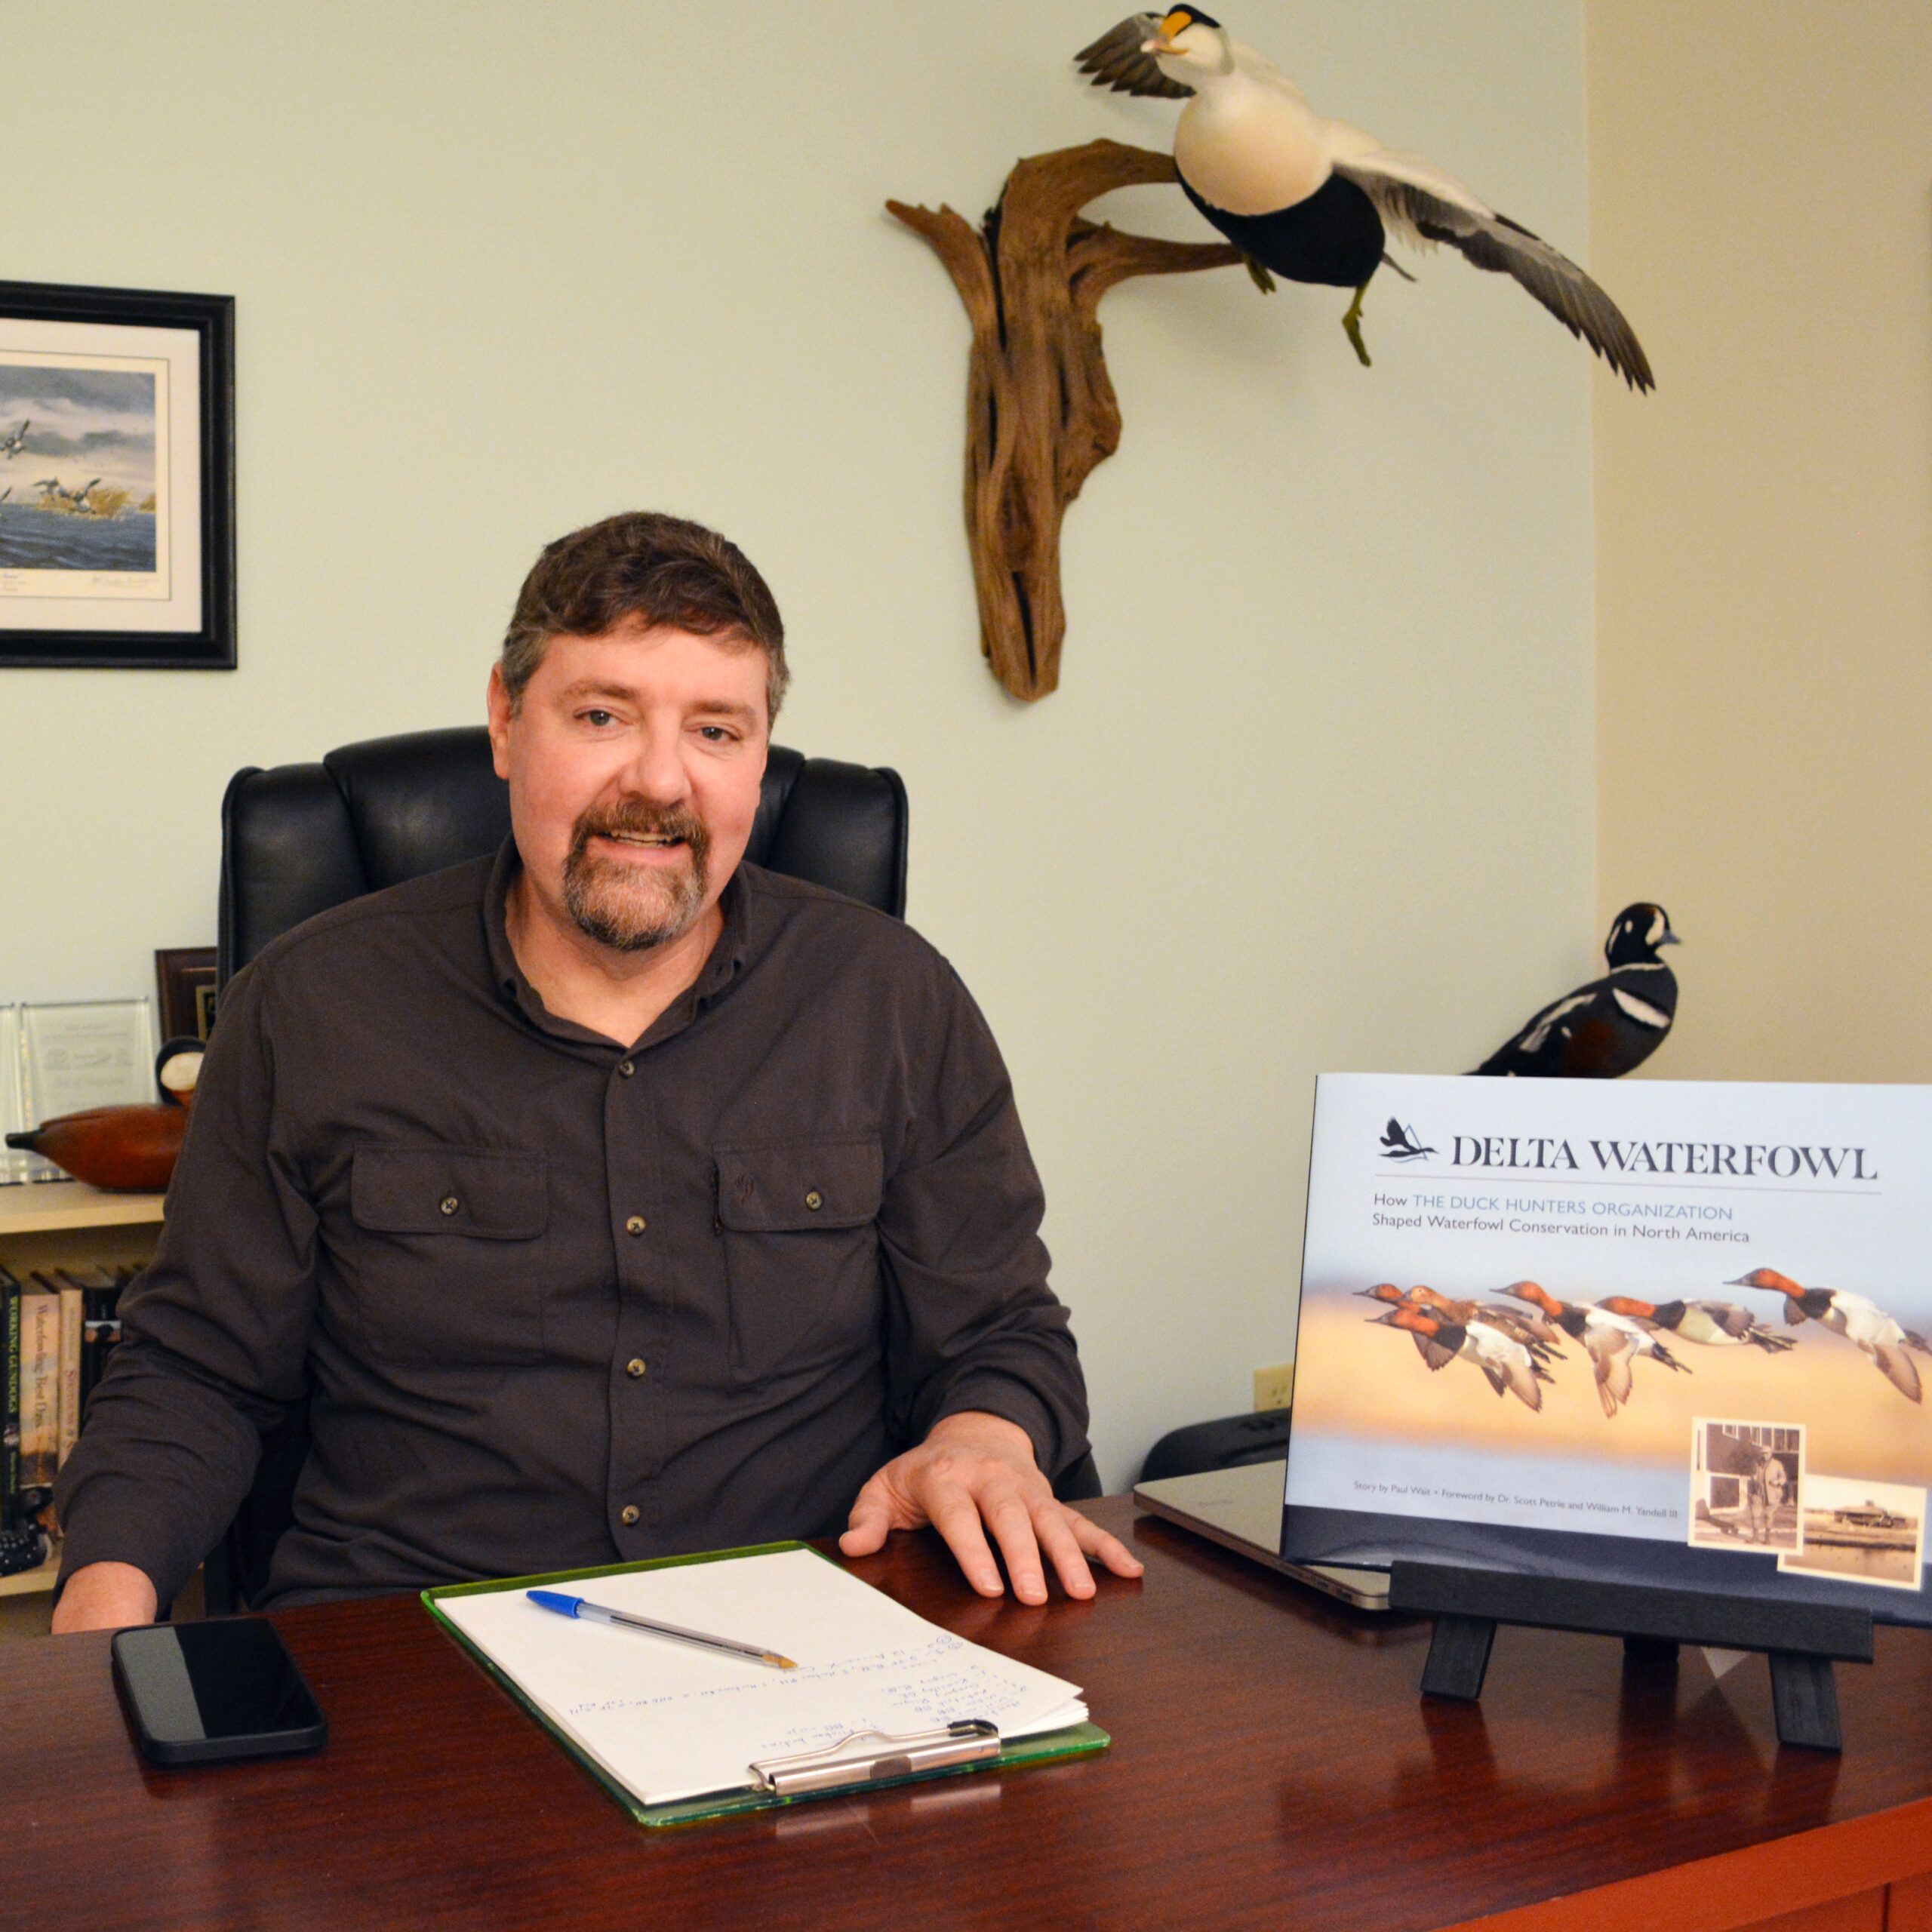 Paul Wait received an award for the book he wrote for Delta Waterfowl. He's pictured here with the book in his office.